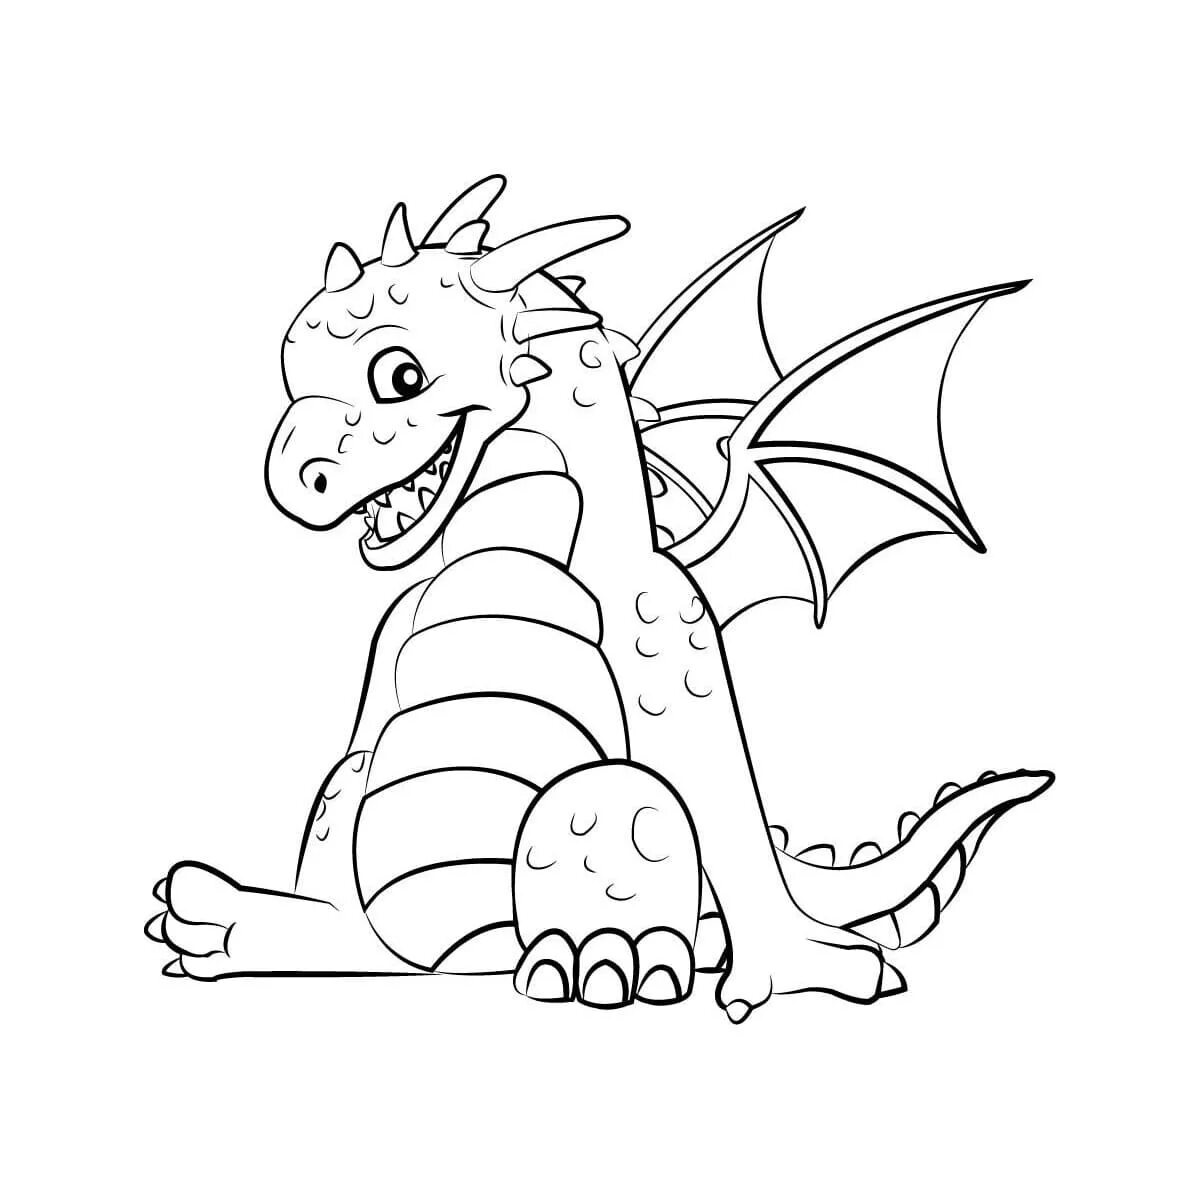 Impressive dragon coloring pages for kids